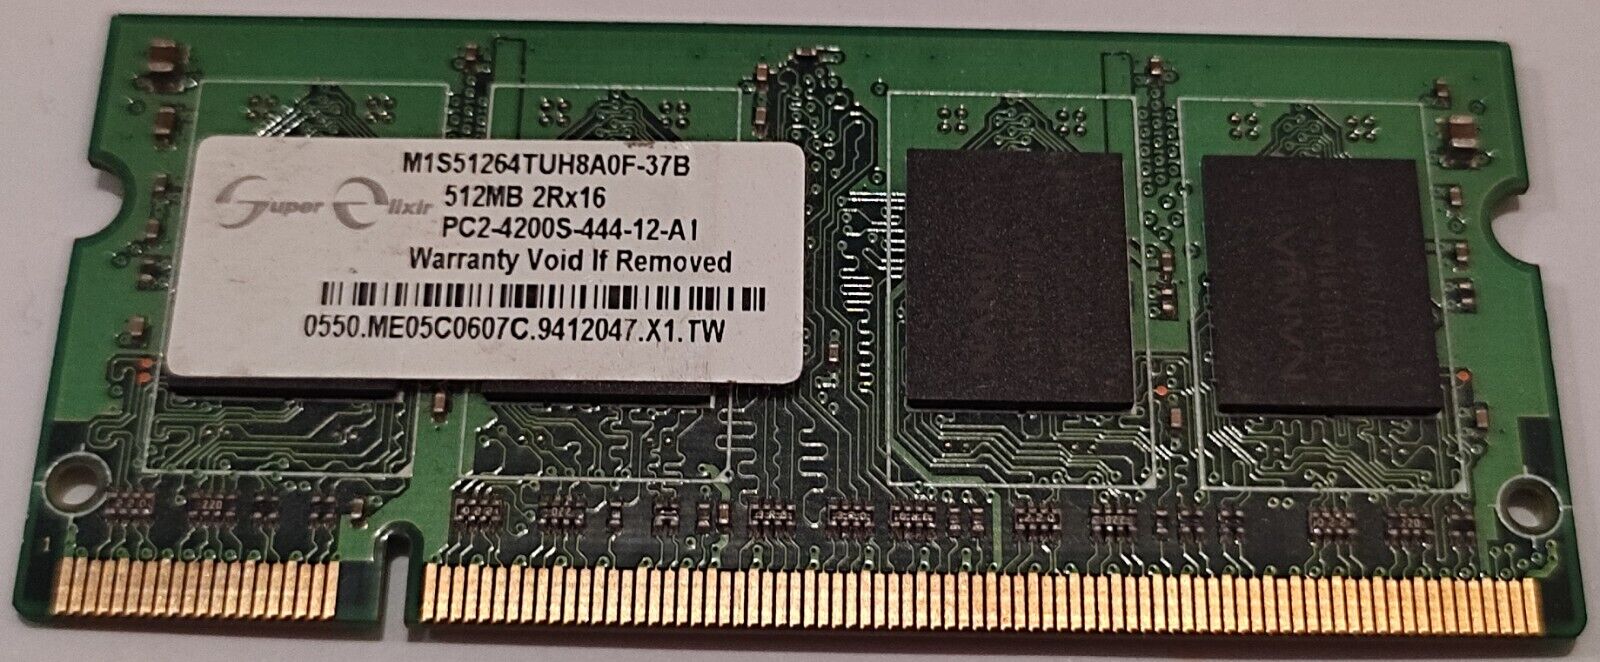 Super Elixir LAP TOP MEMORY 512MB PC2-4200 533MHz M1S51264TUH8AOF-37B  NOTEBOOK